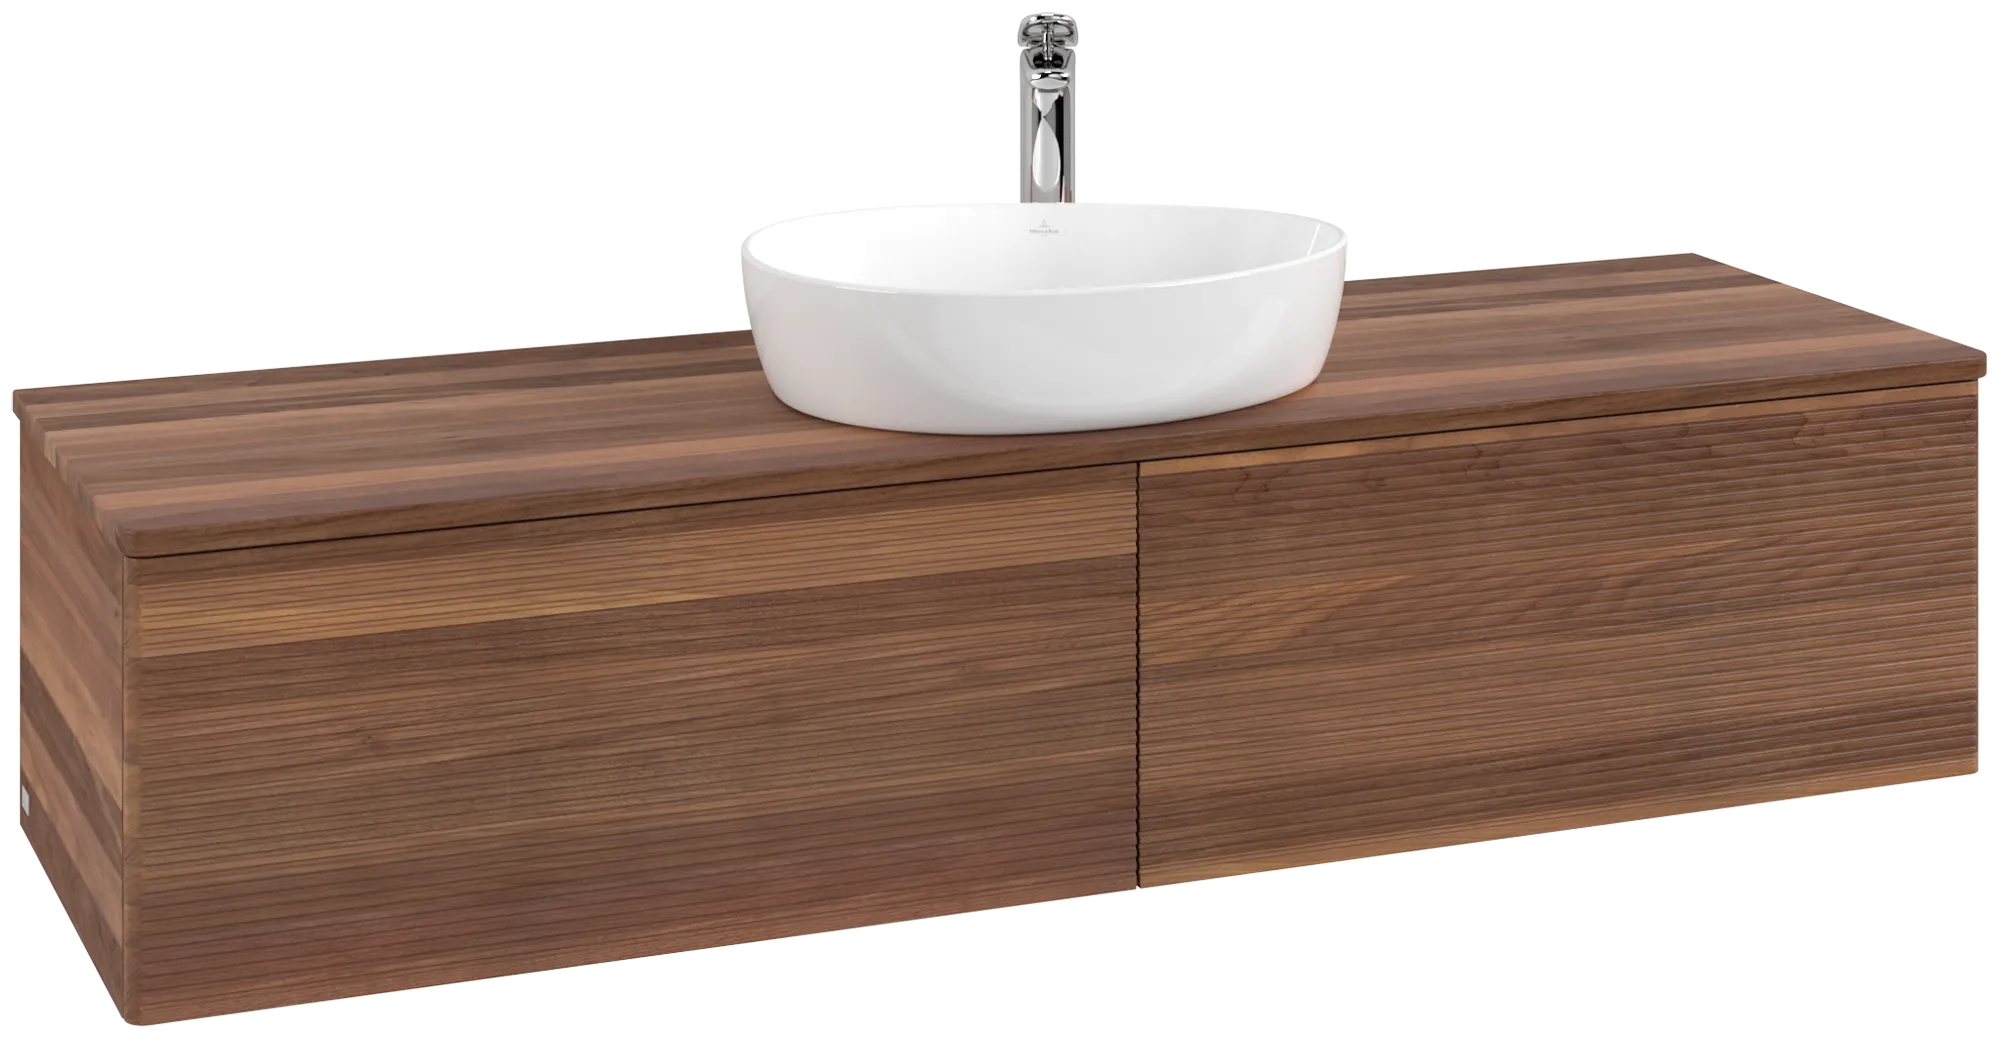 VILLEROY BOCH Antao Vanity unit, 2 pull-out compartments, 1600 x 360 x 500 mm, Front with grain texture, Warm Walnut / Warm Walnut #K36152HM resmi